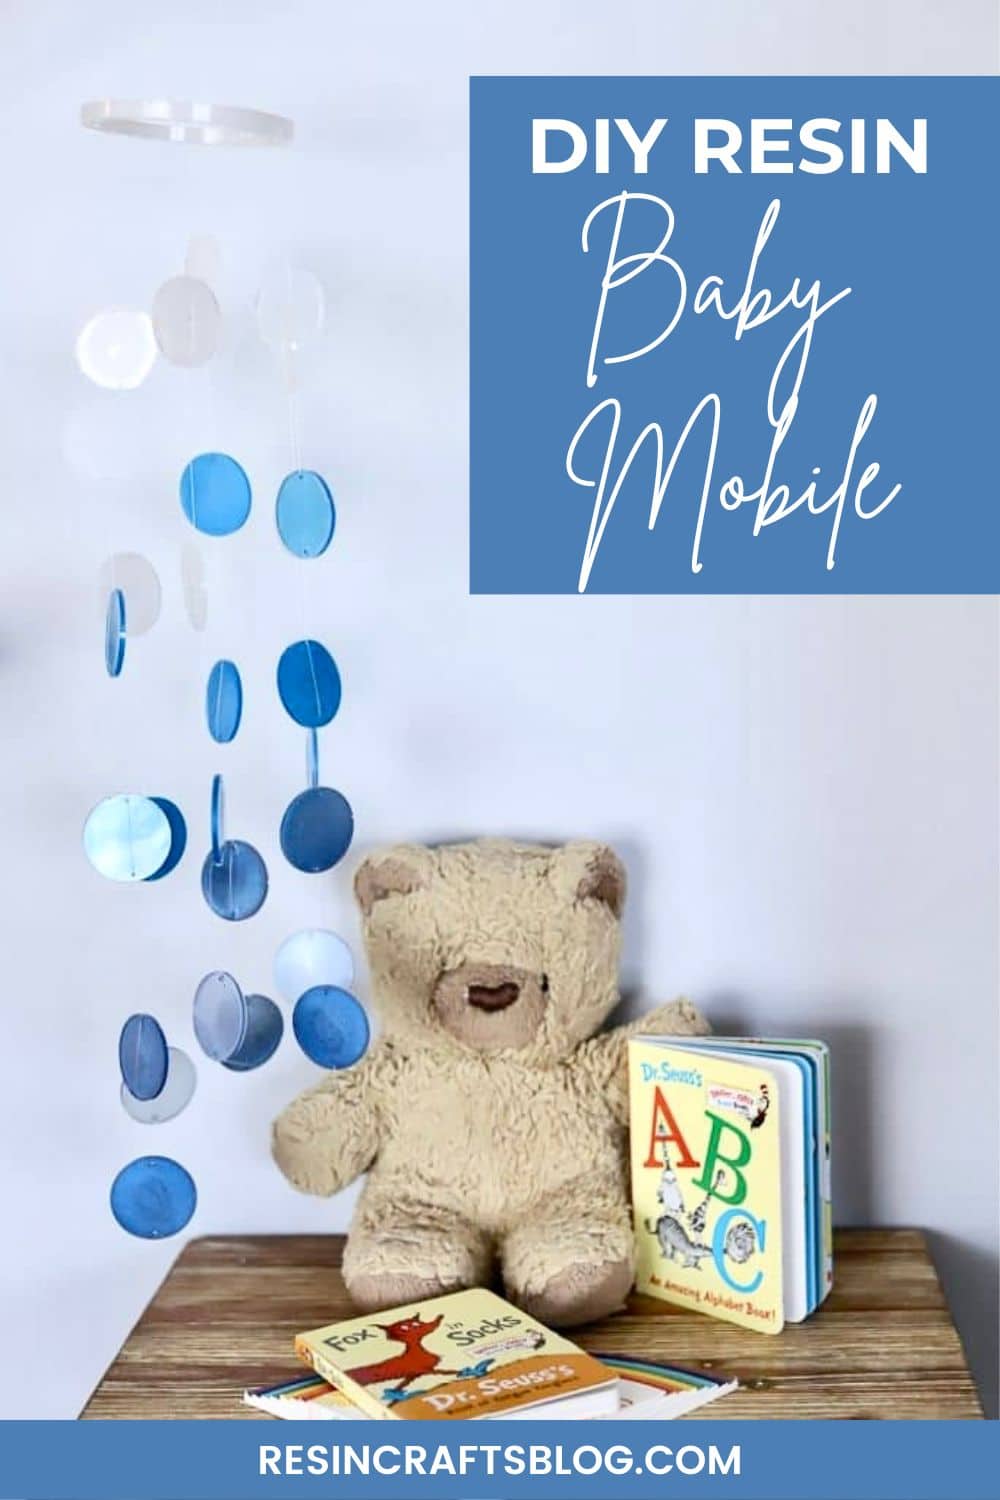 Make your very own baby mobile to decorate your nursery! Use Promise Epoxy resin and colorful Mica Powders from Color Creator to make a custom Baby Mobile! #resincrafts via @resincraftsblog